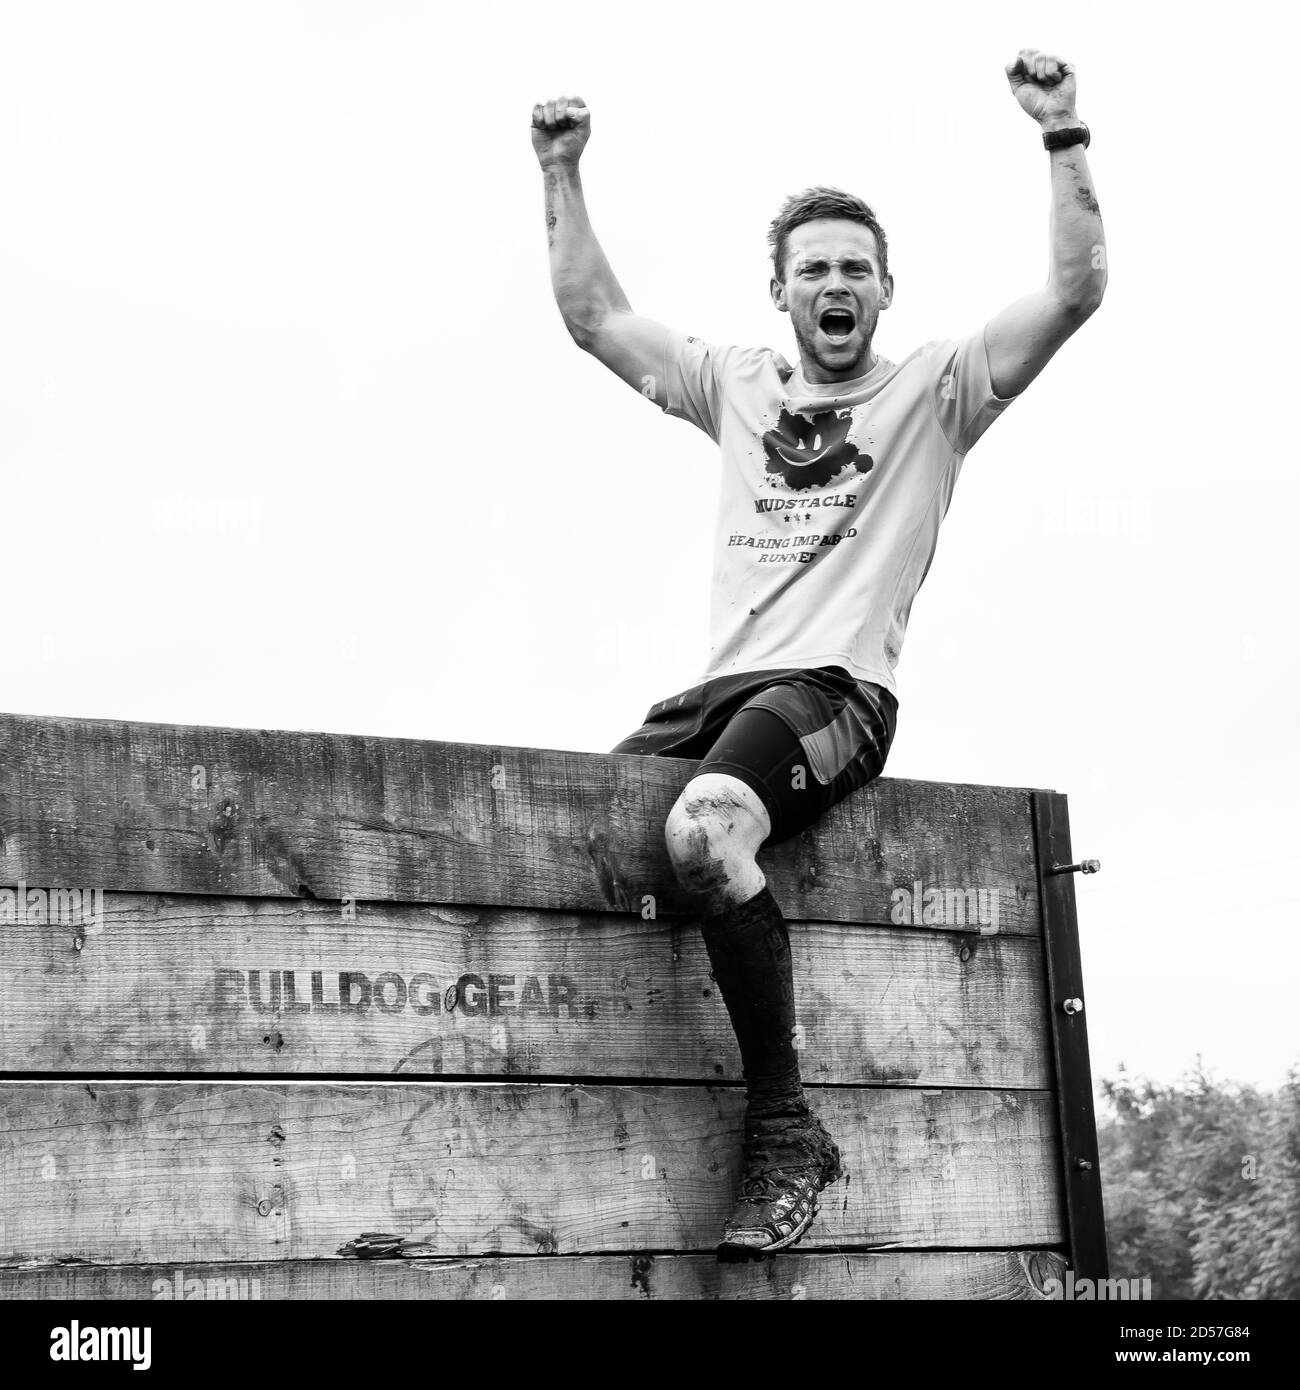 TAMWORTH, UNITED KINGDOM - Oct 15, 2015: More photos from the Scorpion Run tough mudder outdoor obstacle course mud run. Stock Photo